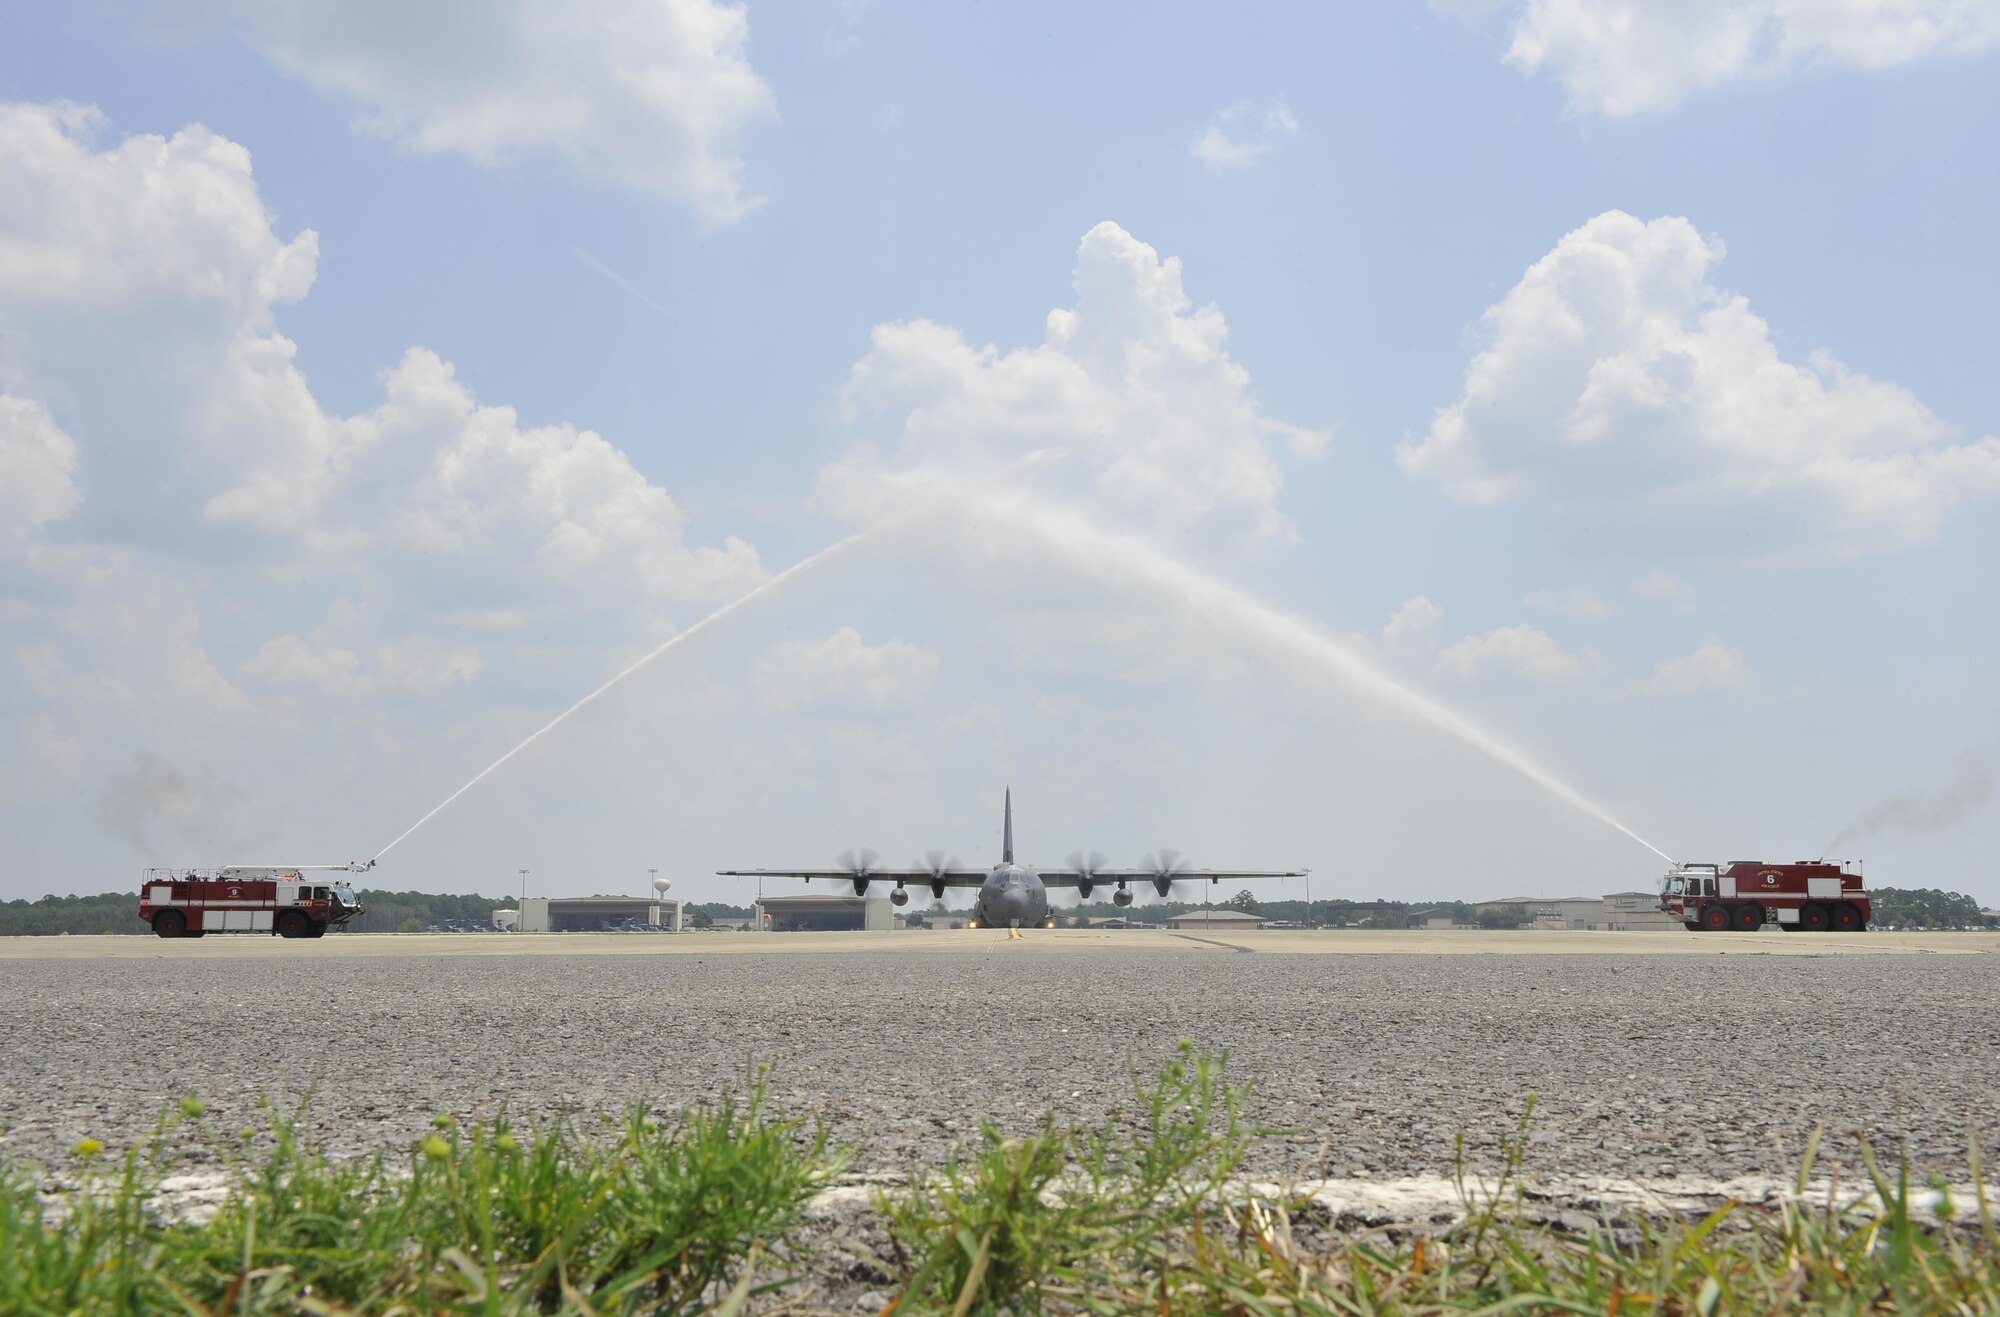 Air Force Special Operations Command’s first AC-130J Ghostrider taxis under a water arch at Hurlburt Field, Fla., July 29, 2015. The AC-130J recently completed its initial developmental test and evaluation at Eglin Air Force Base, Fla., and will begin operational tests and evaluation by Airmen with the 1st Special Operations Group Detachment 2 and 1st Special Operations Aircraft Maintenance Squadron later this year. (U.S. Air Force photo by Airman Kai White/Released)